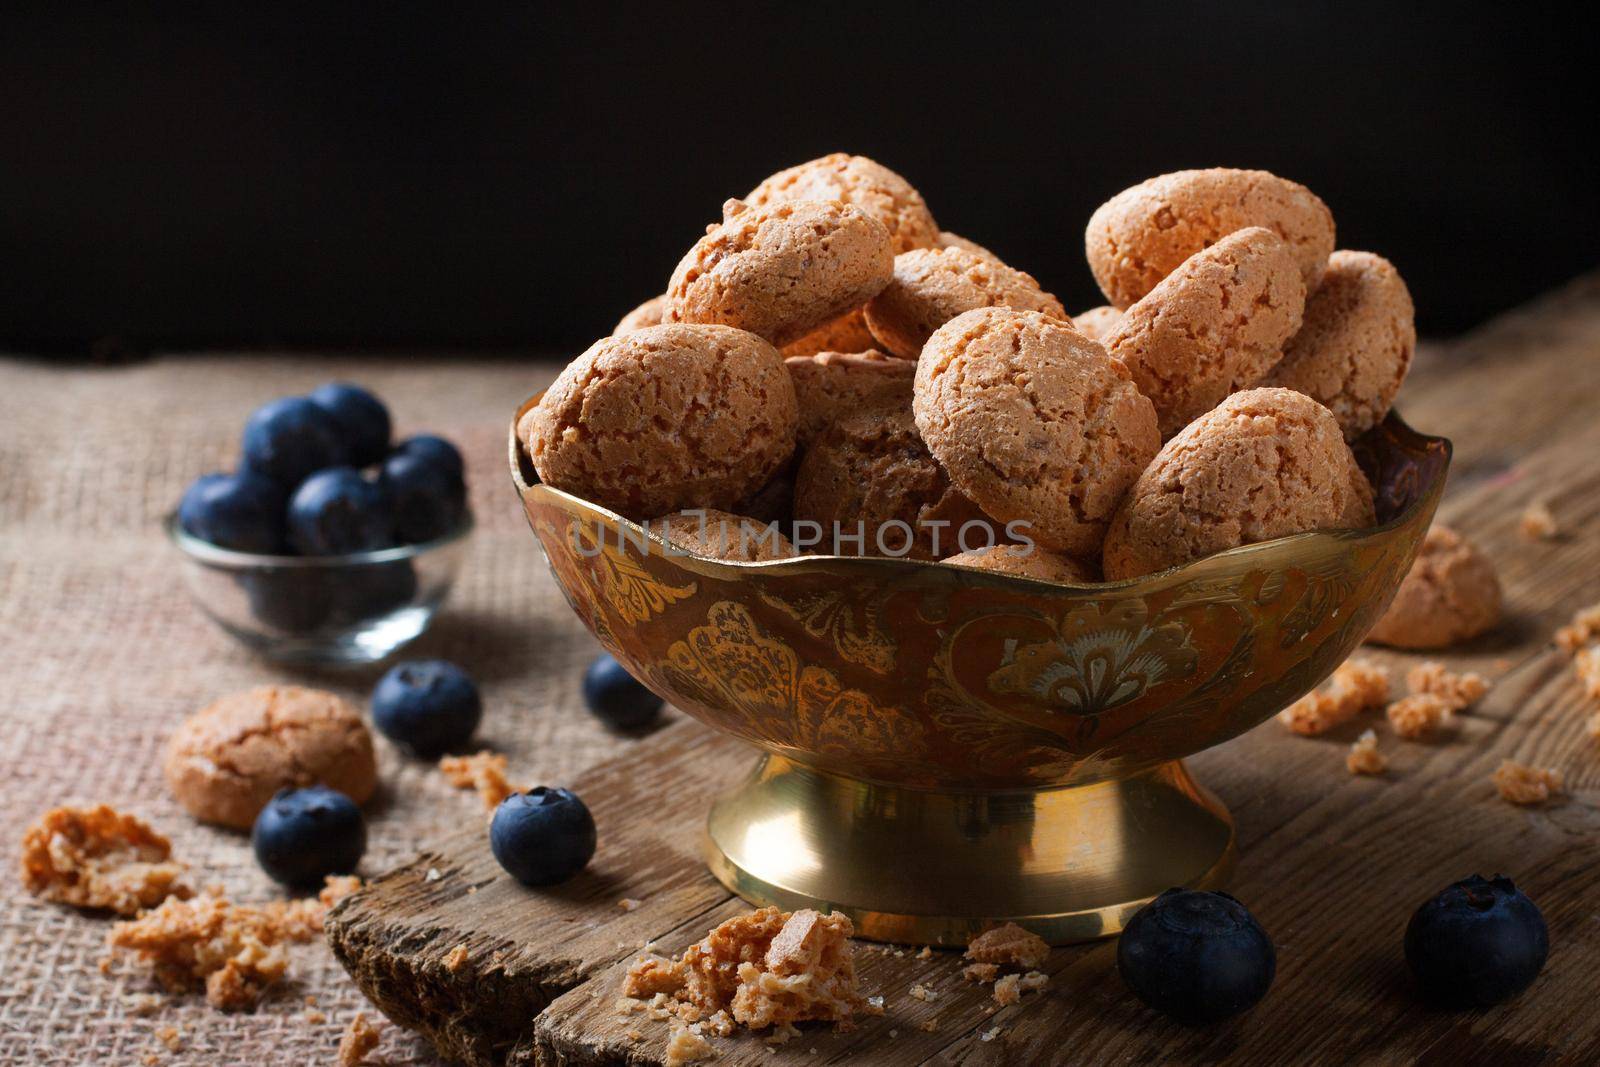 Italian almond cookie amaretti with blueberries on rustic wooden board, selective focus, law key.